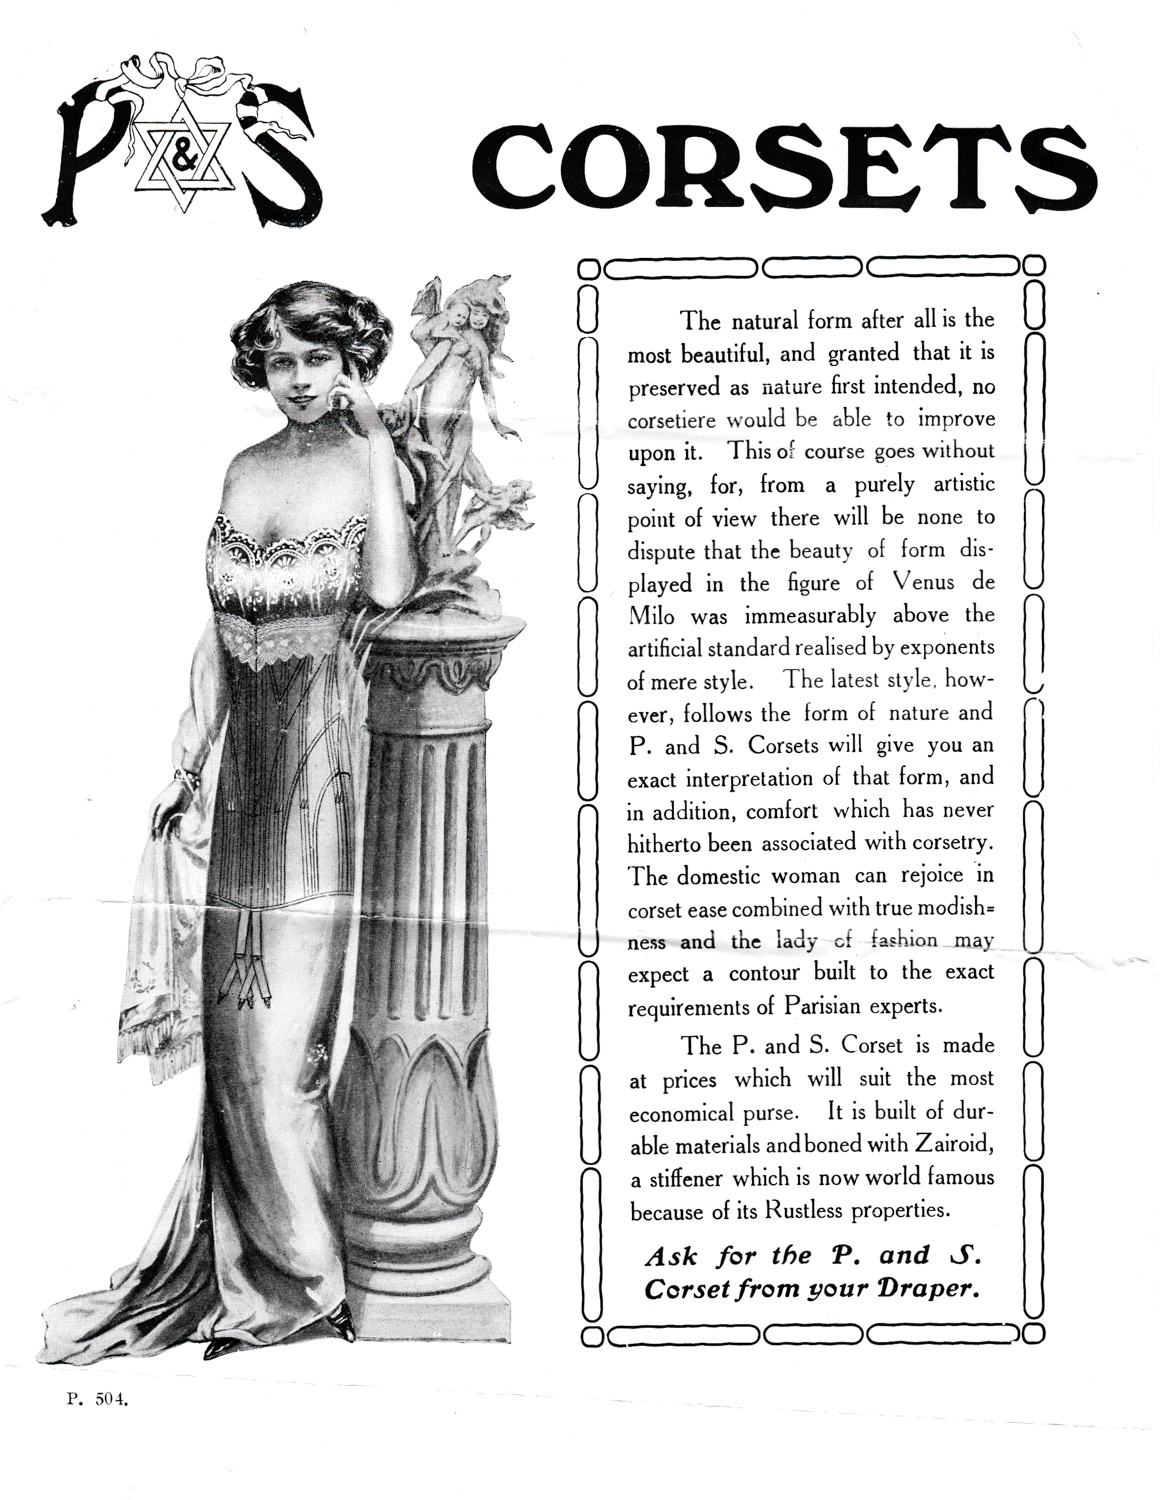 P&S Corsets Advertisement, c. 1910s, Great Britain. The Underpinnings Museum